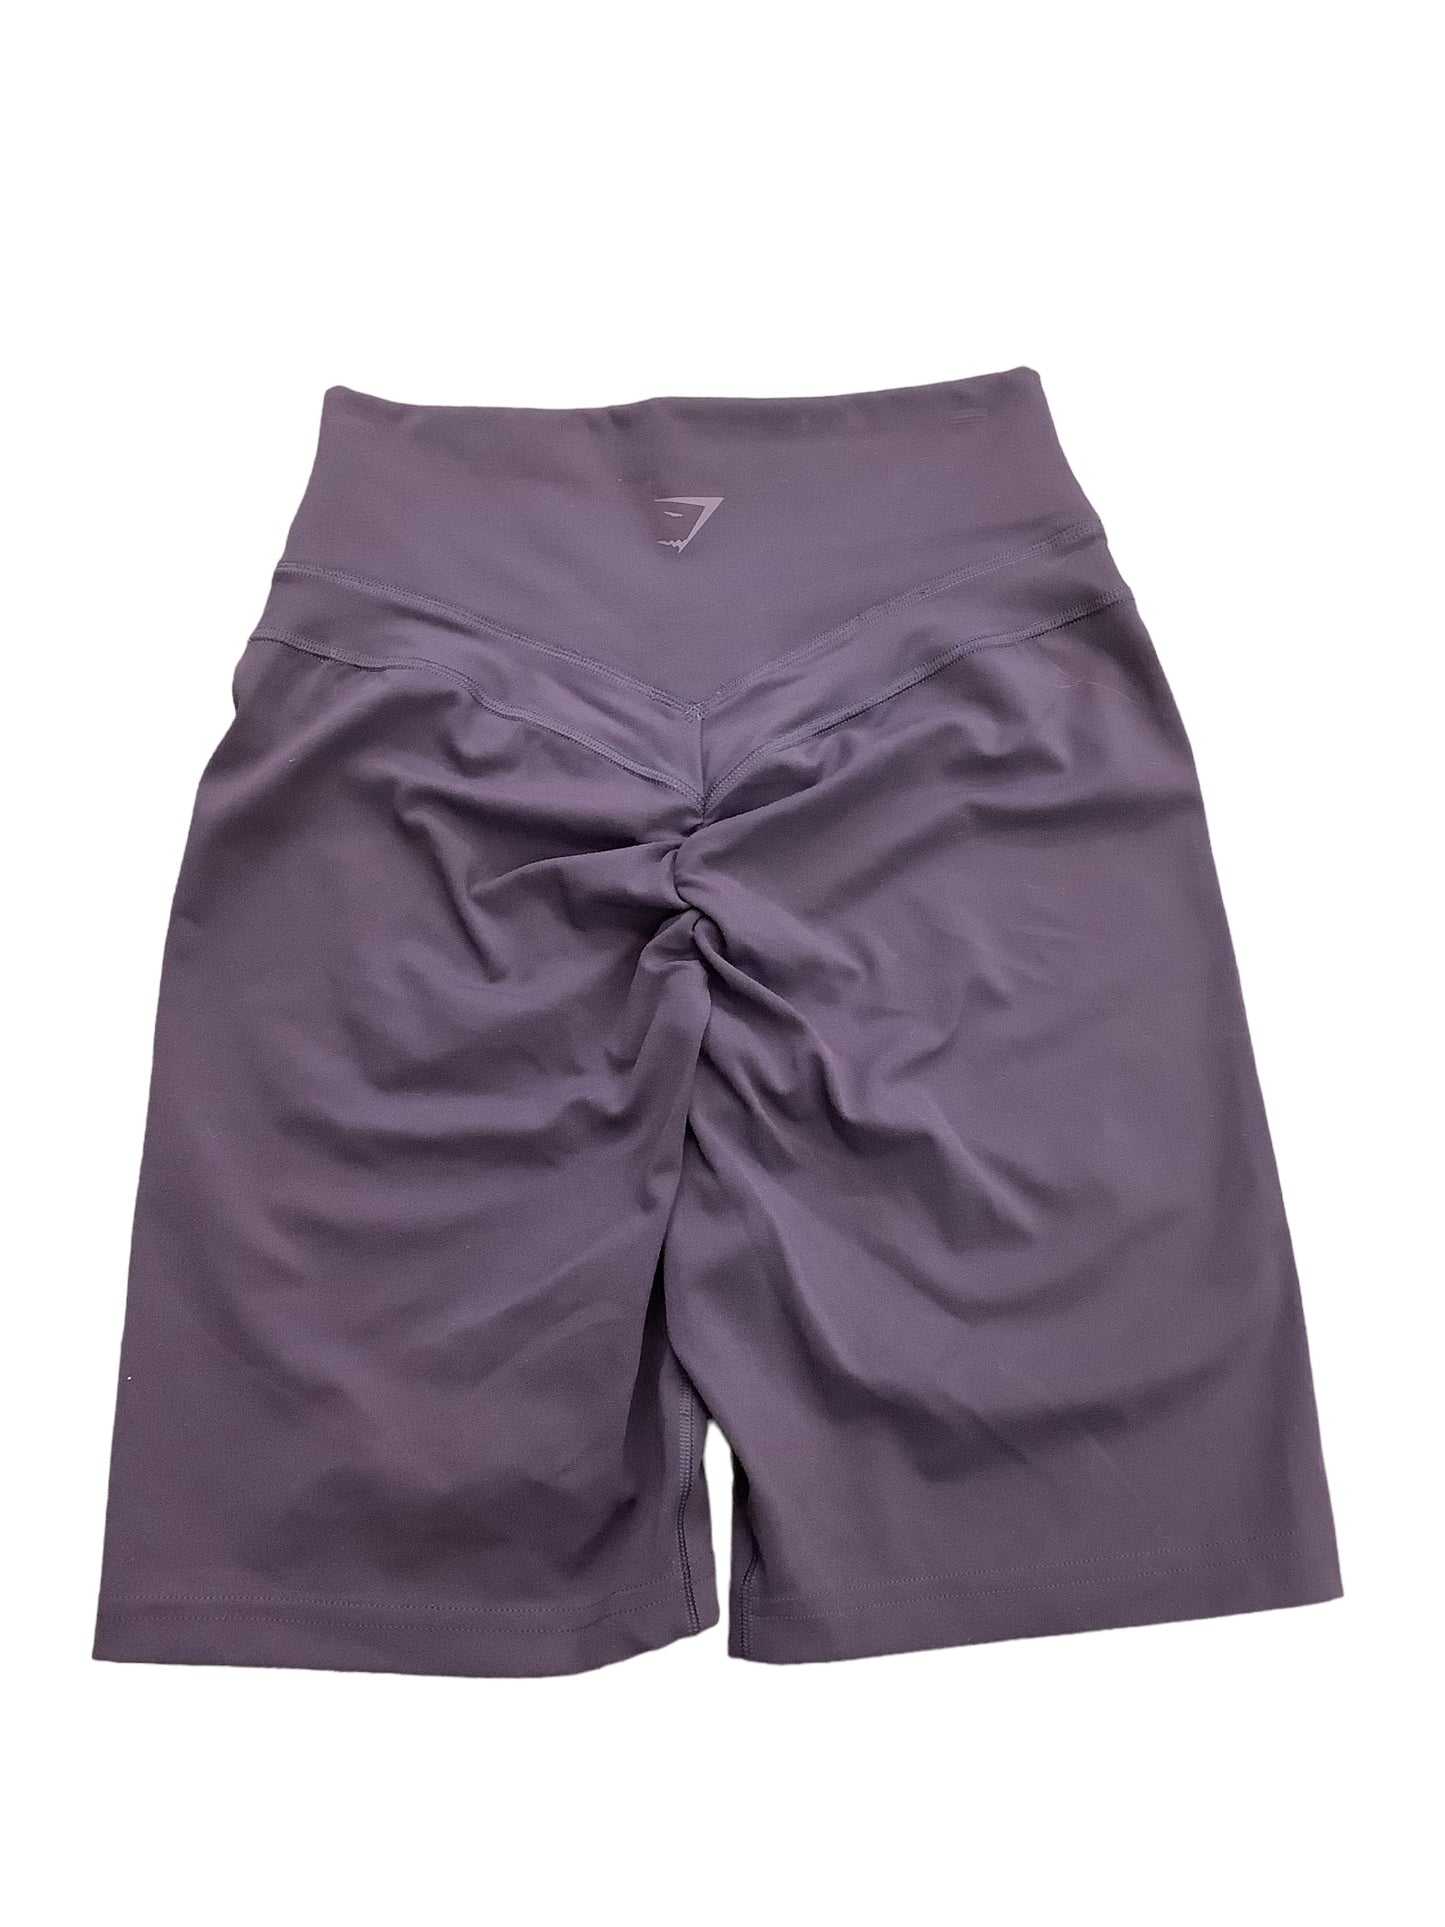 Athletic Shorts By Gym Shark  Size: S